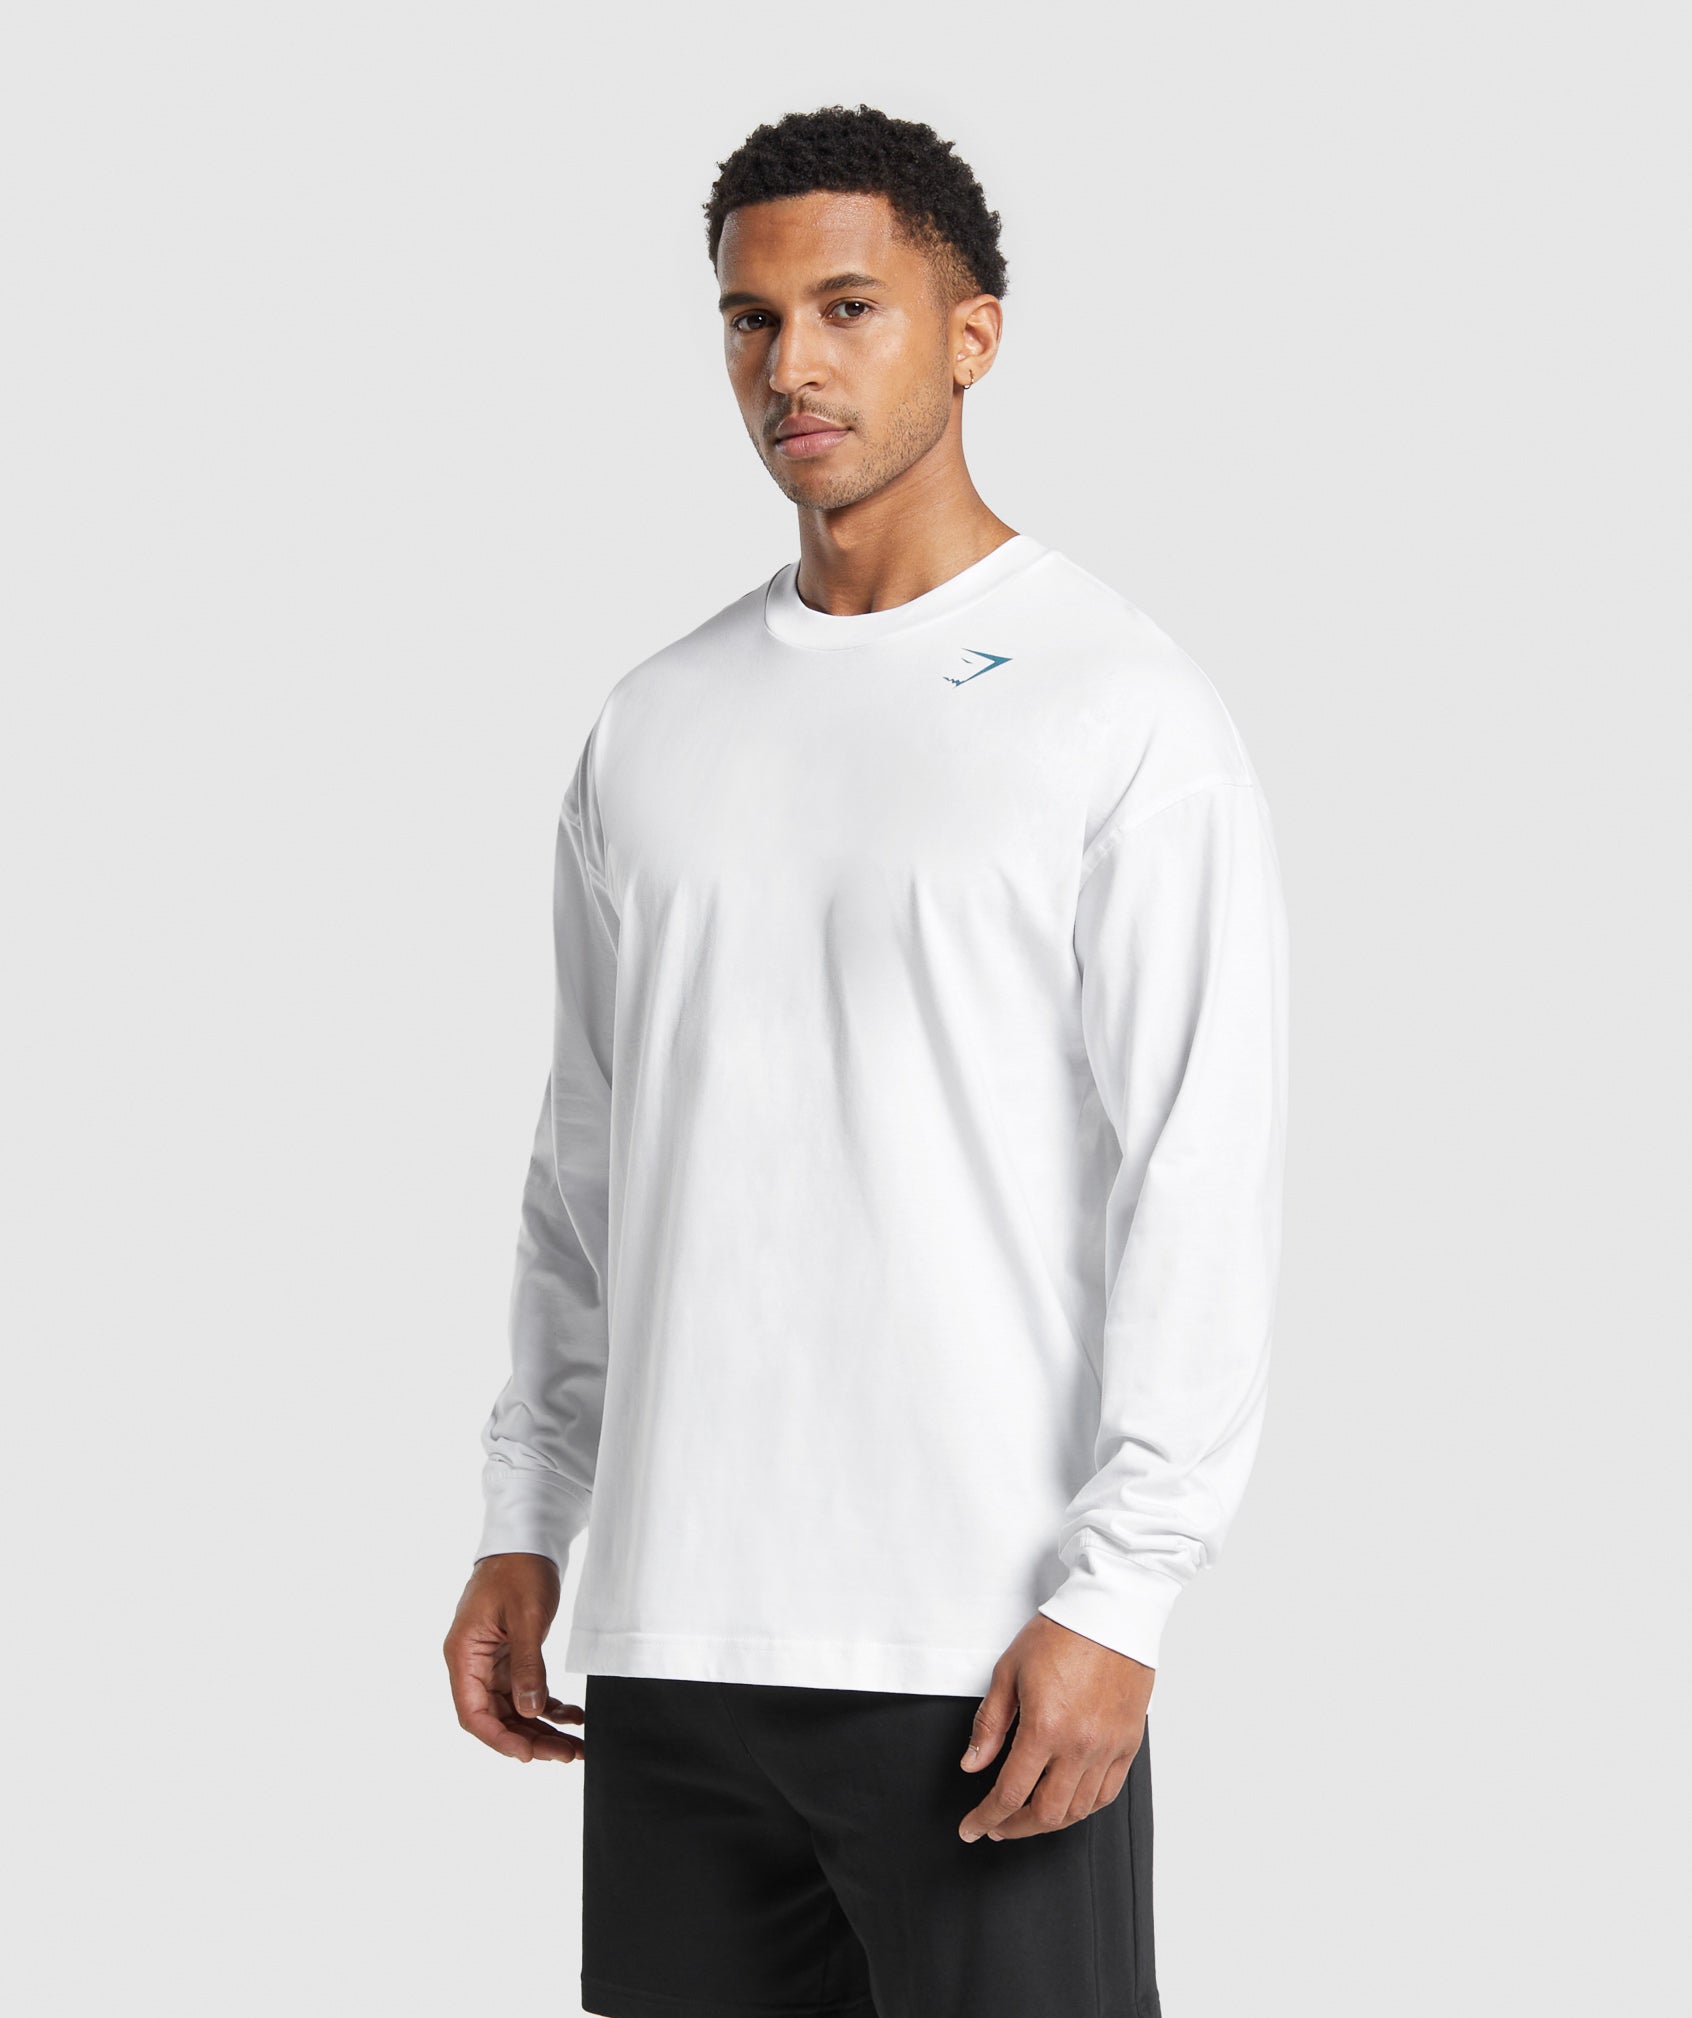 Western Long Sleeve T-Shirt in White - view 3